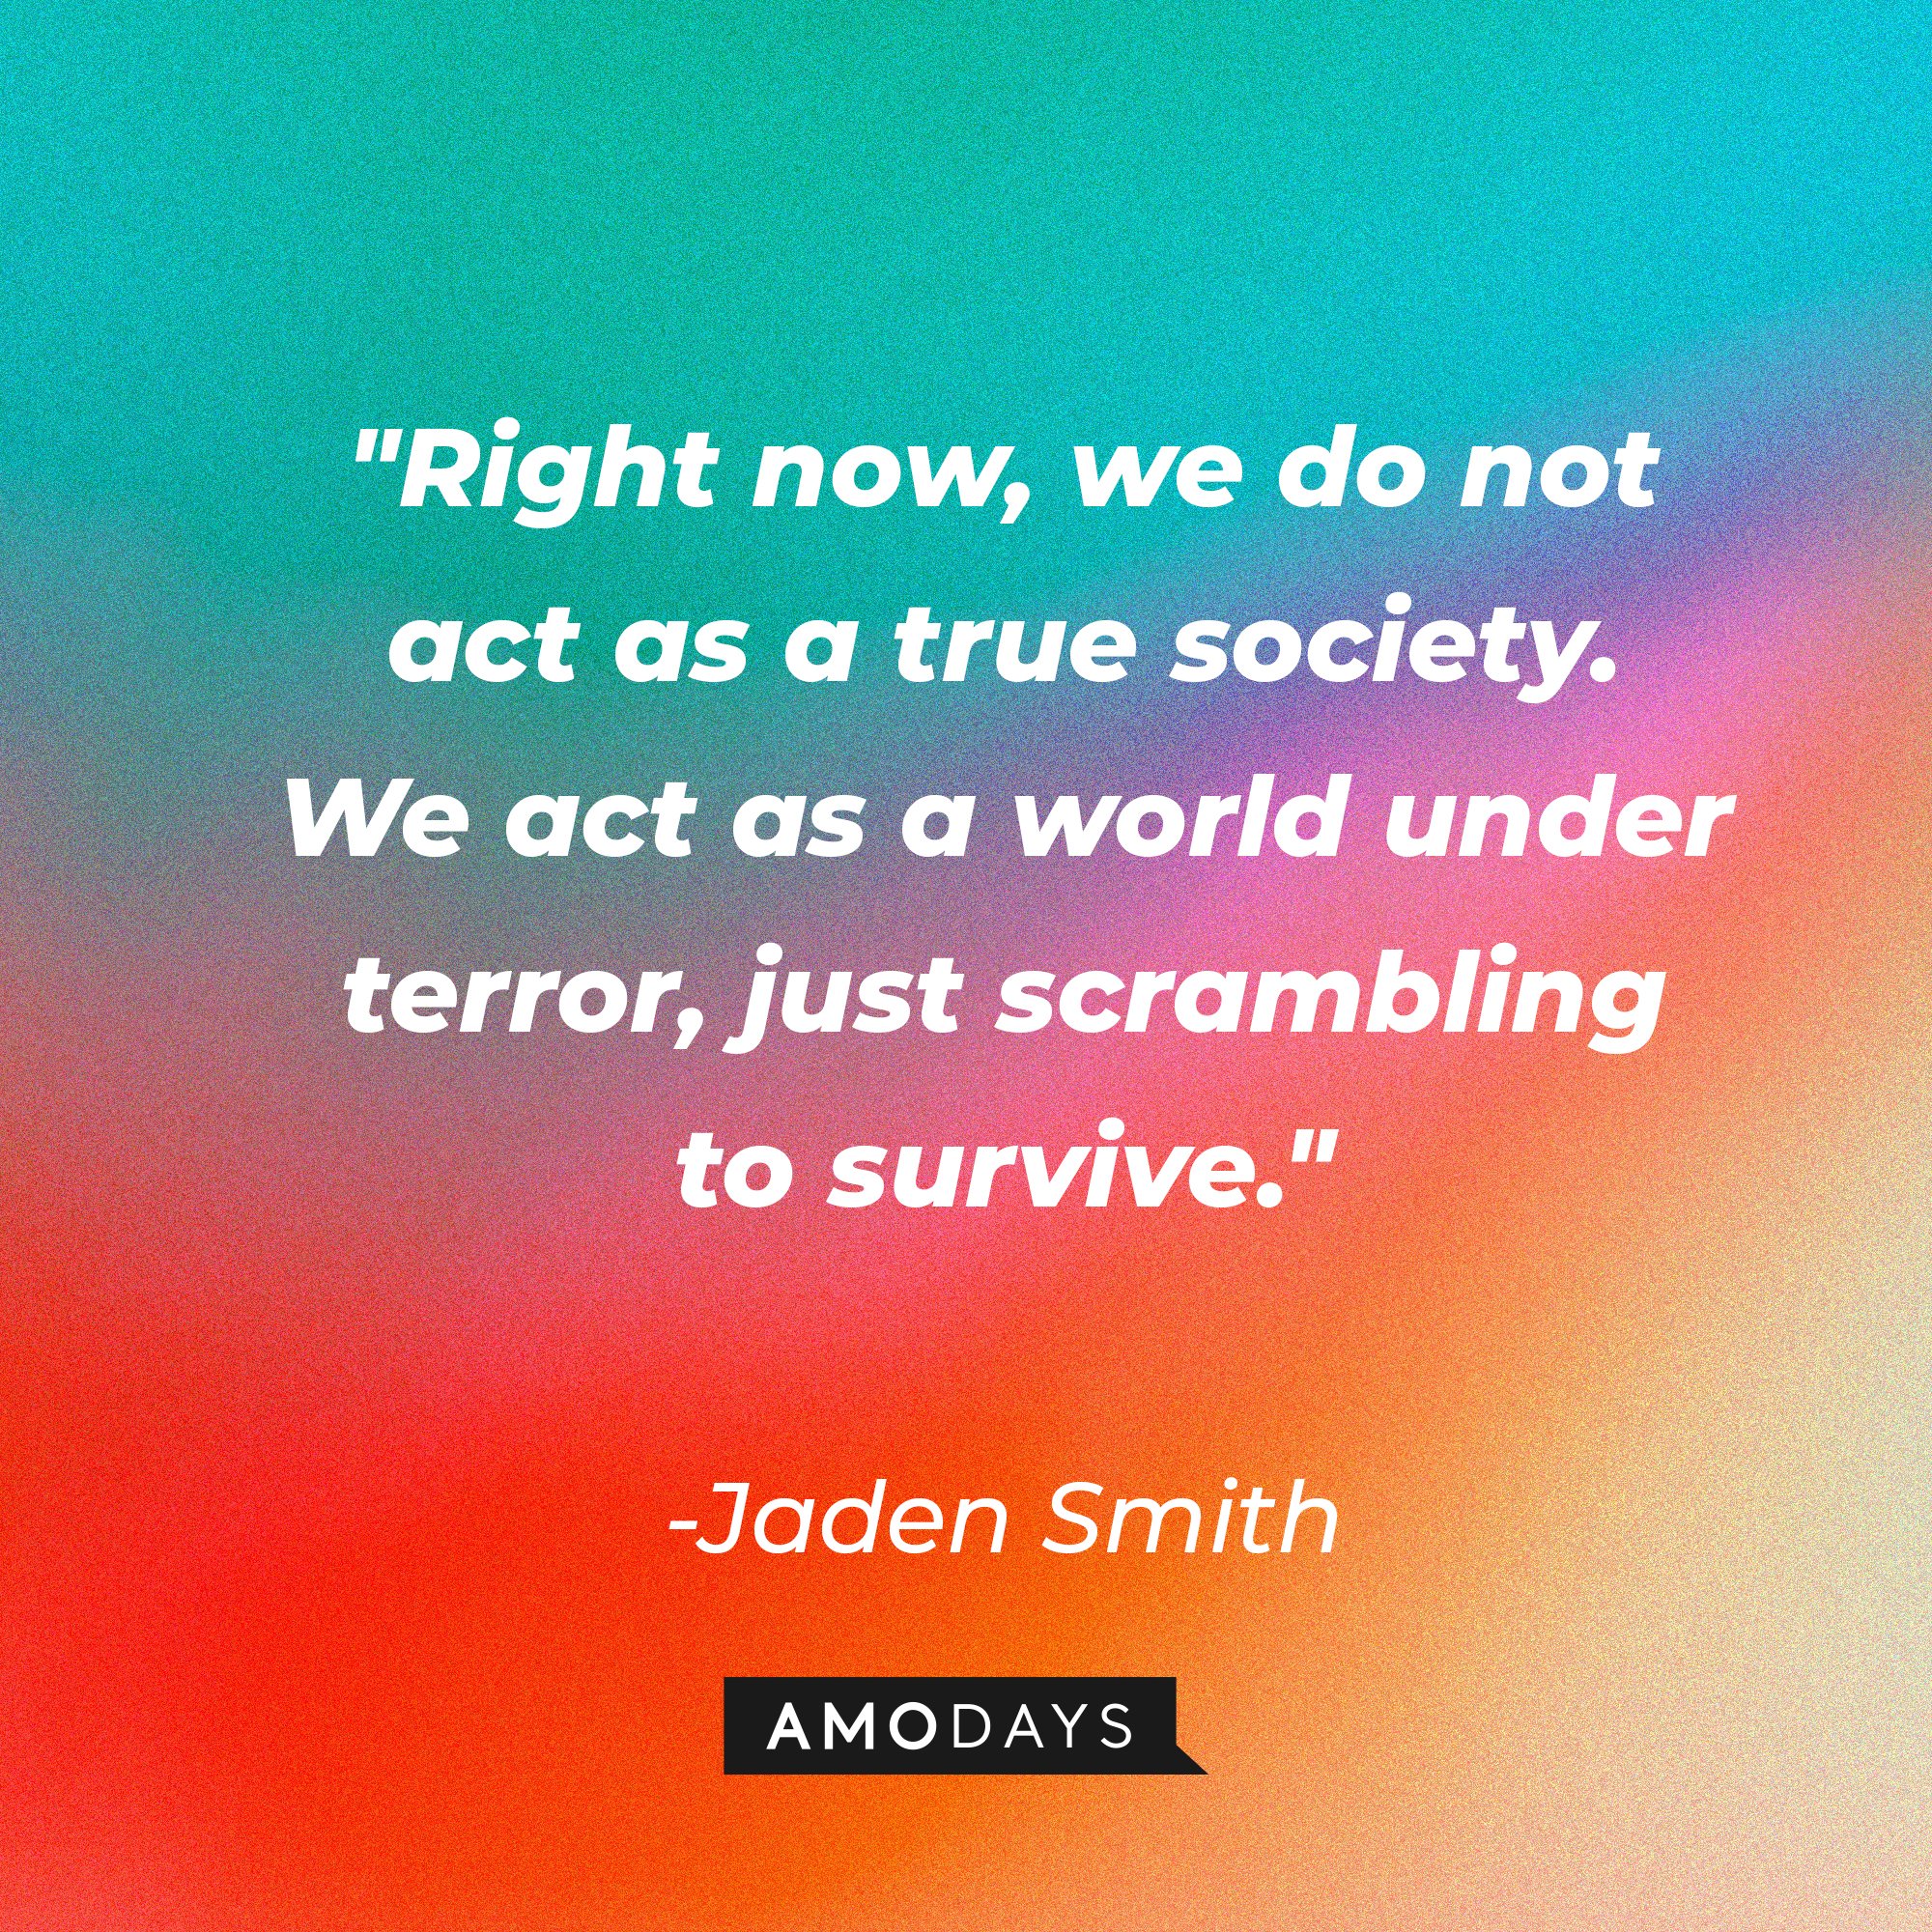 Jaden Smith's quote: "Right now, we do not act as a true society. We act as a world under terror, just scrambling to survive." | Image: AmoDays